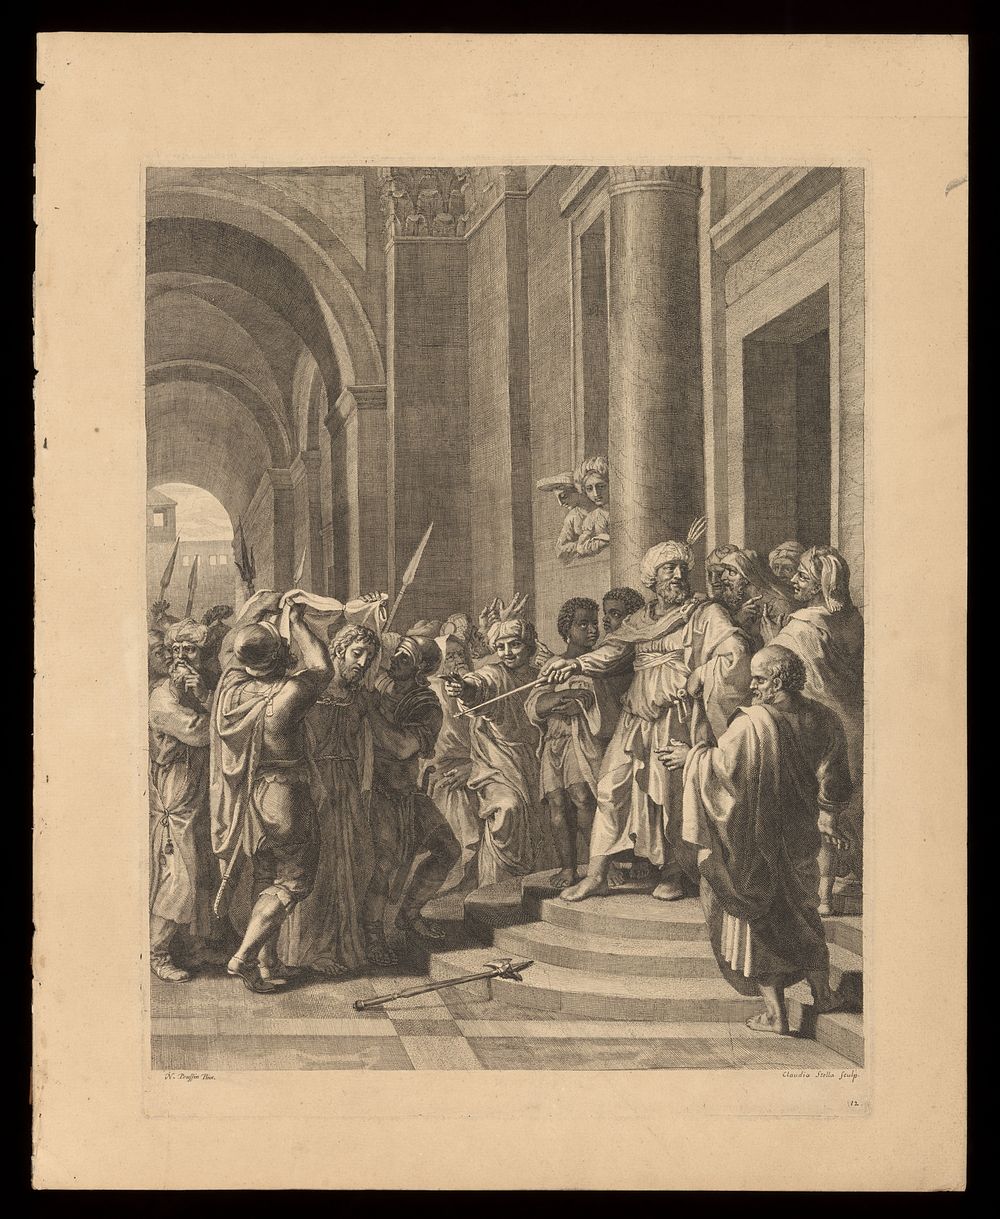 Pontius Pilate interrogates Jesus and finds no fault in him. Engraving by C. Bouzonnet Stella after J. Stella.